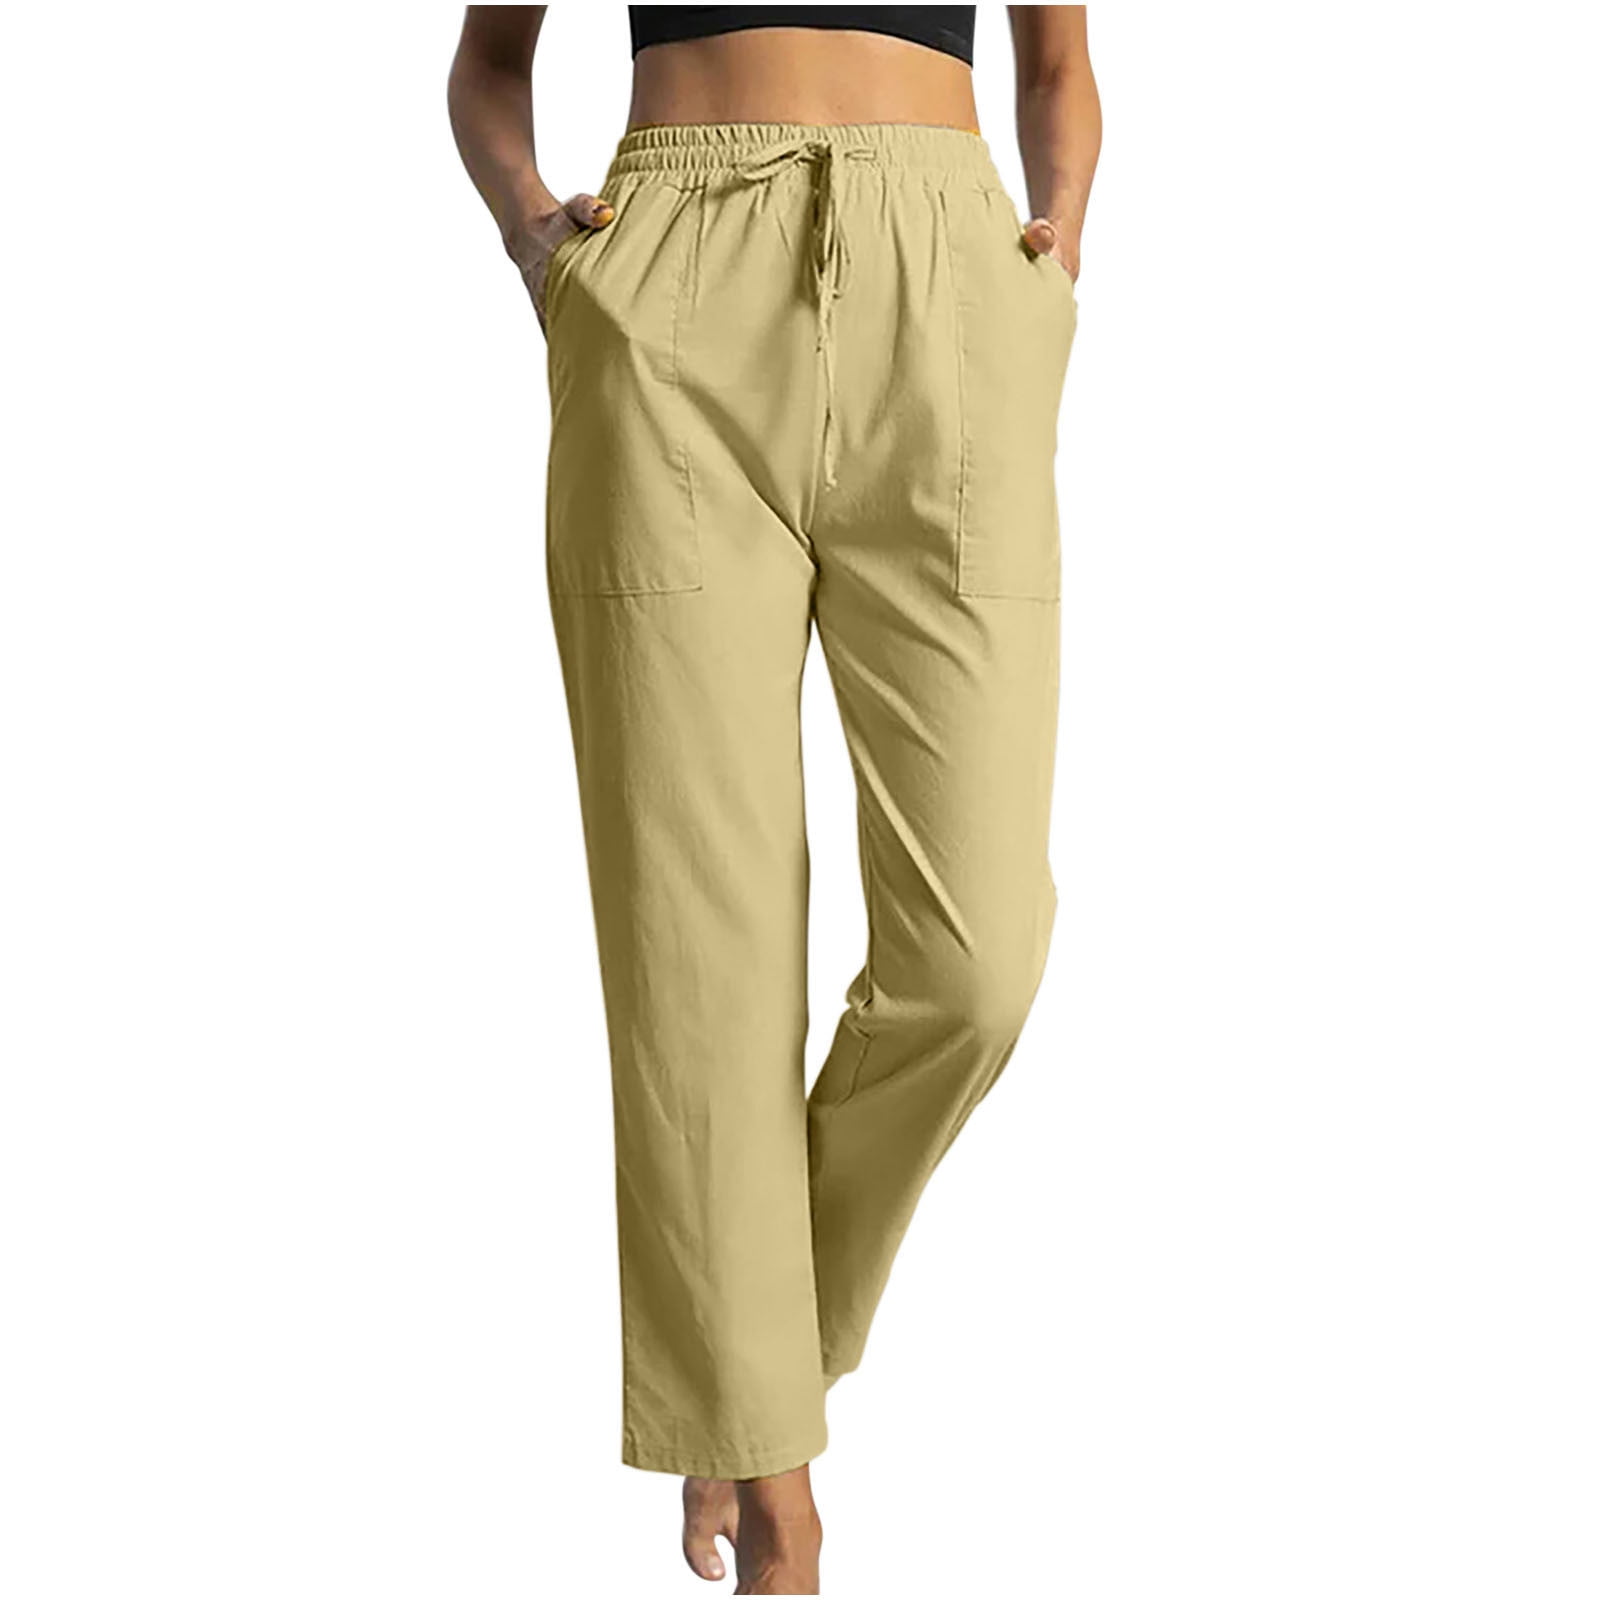 Mrat Full Length Pants Women s Wear Work Ladies Solid Cotton Linen Ankle Length Pokets Casual Elastic Trousers Long Workout Running Legging a9ea249c f0b0 4eda 860b 6d13d3d3434f.2eb6d94fad3f9b8d253c780e5f8dcd64